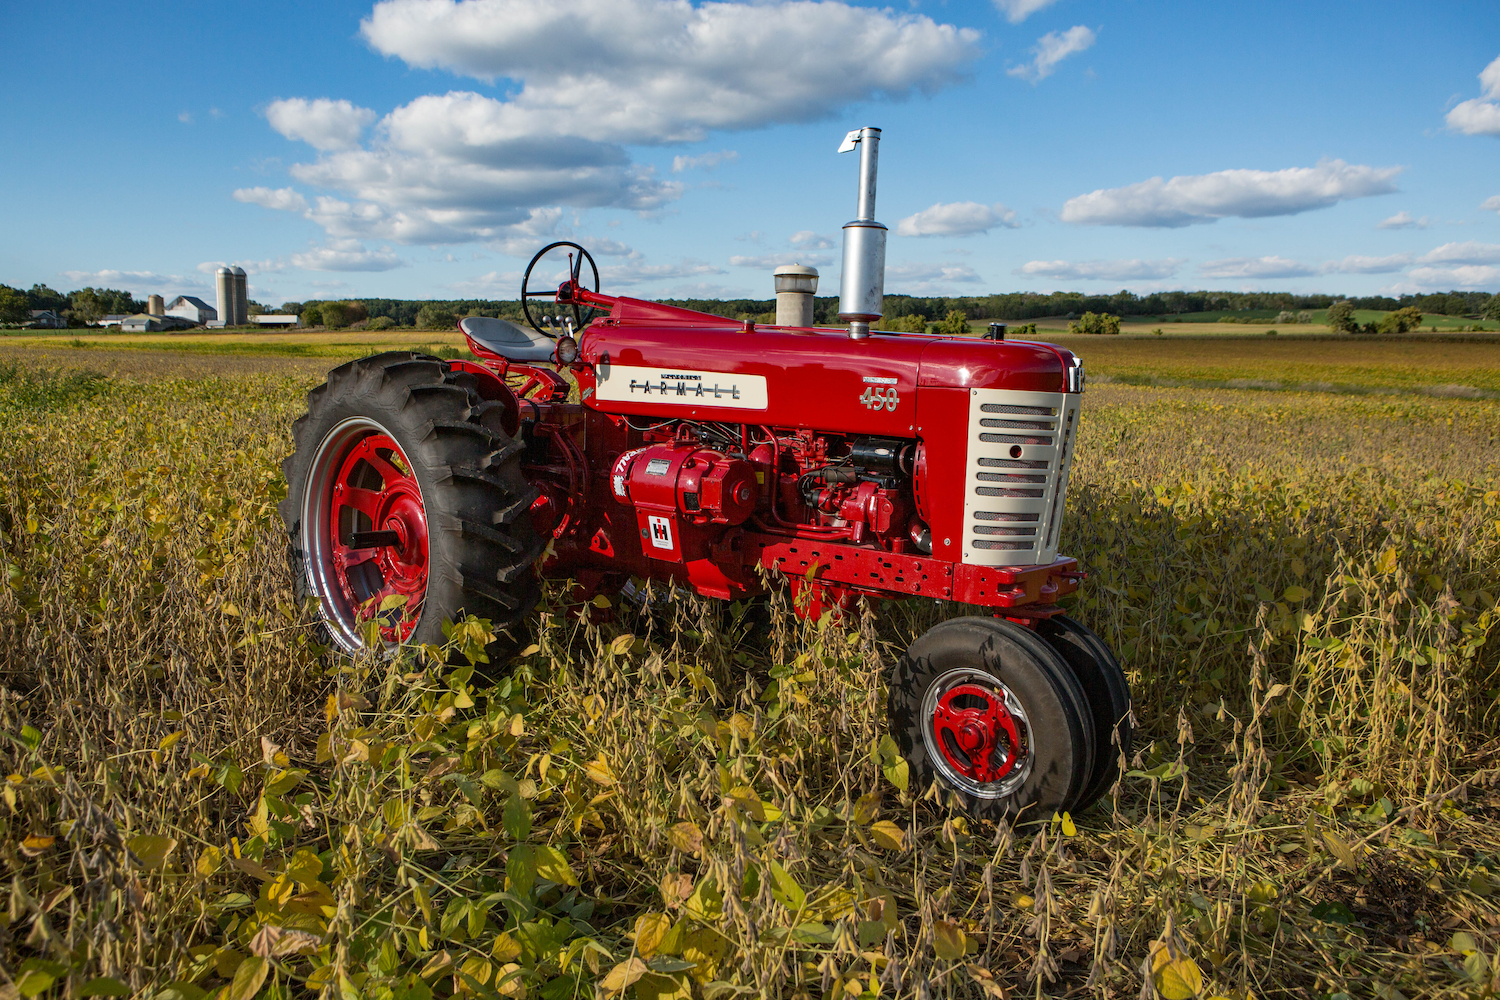 1957 FARMALL 450 WITH ELECTRALL